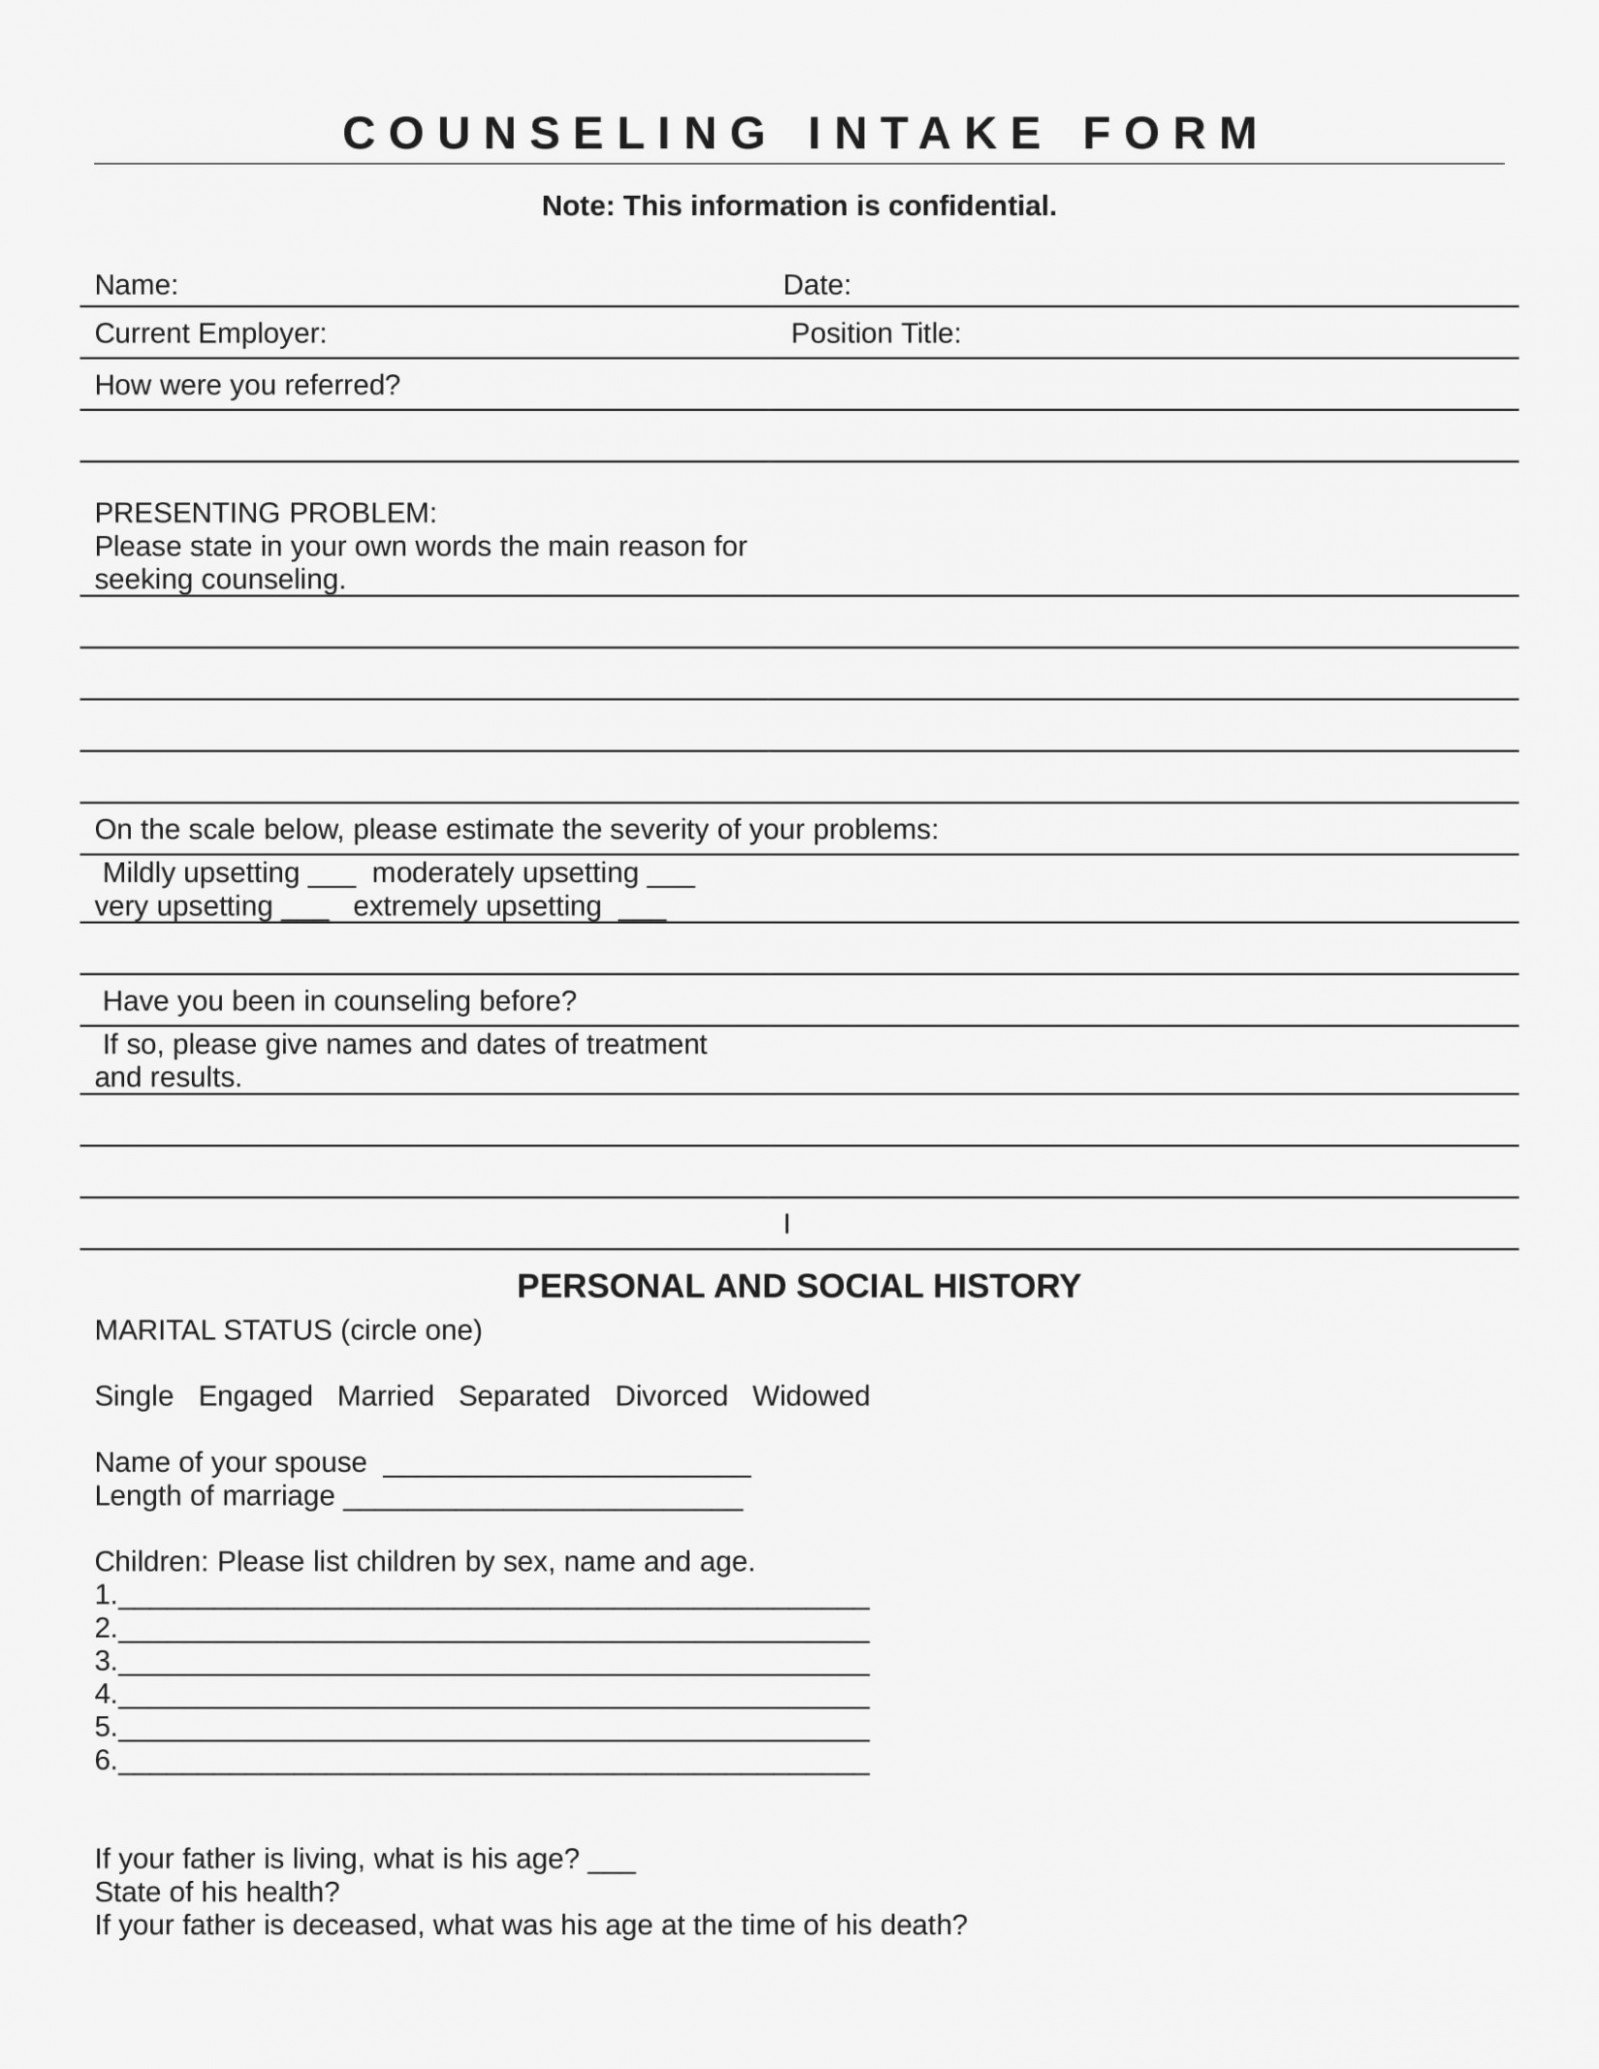 Counseling Intake form Template Lovely You Should Experience Counseling Intake